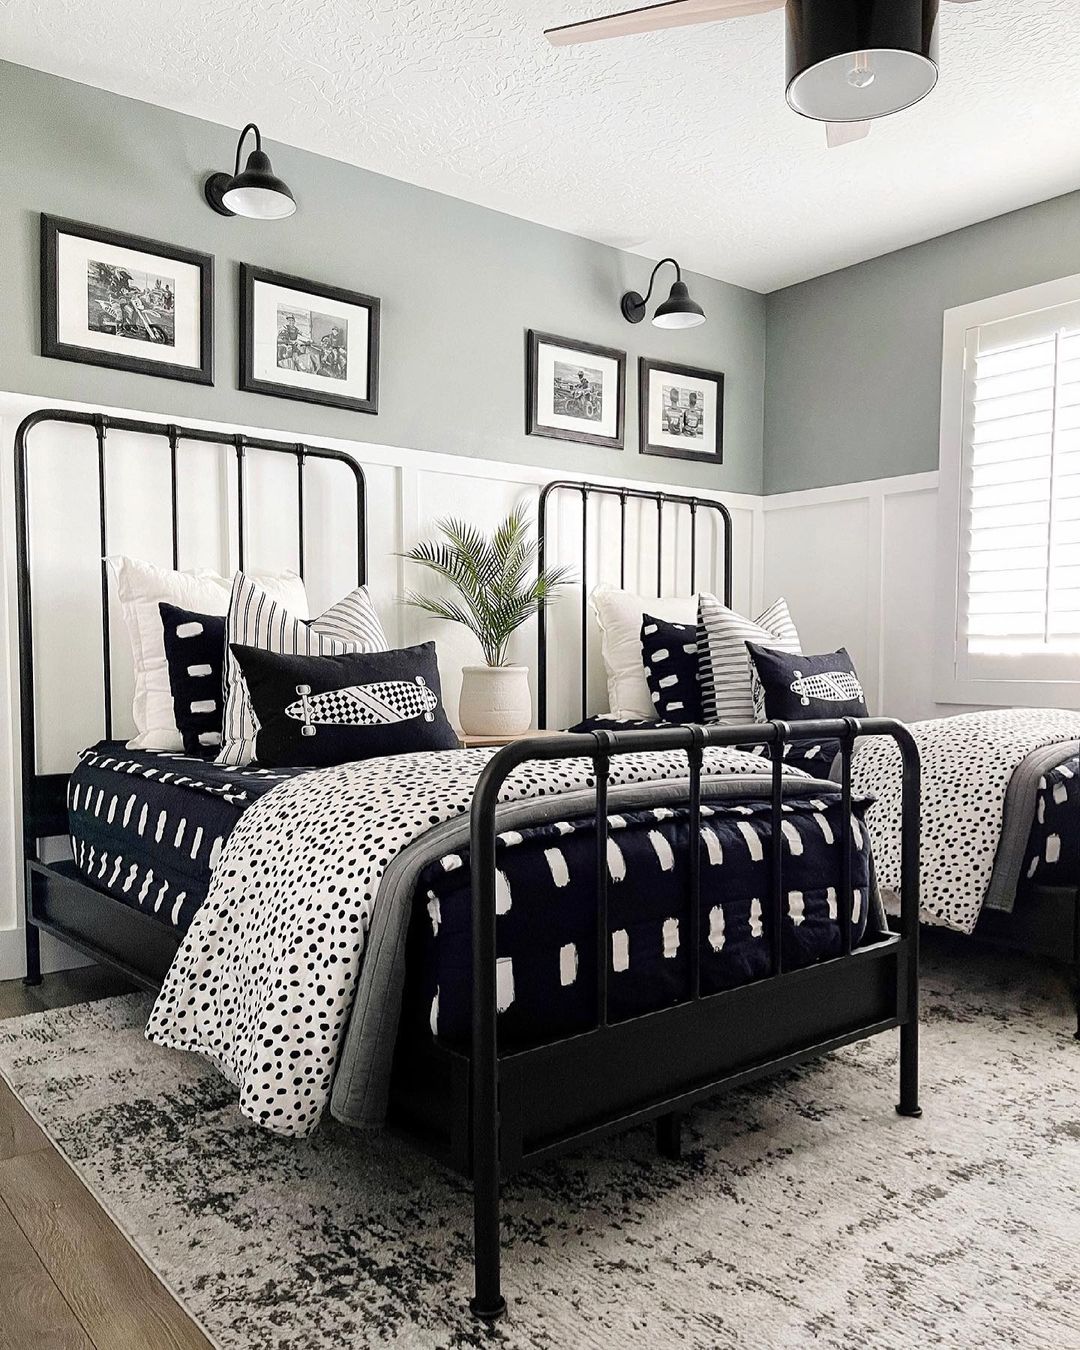 Two Twin Kids Beds on Industrial Style Bed Frames. Photo by Instagram user @greybirchdesigns